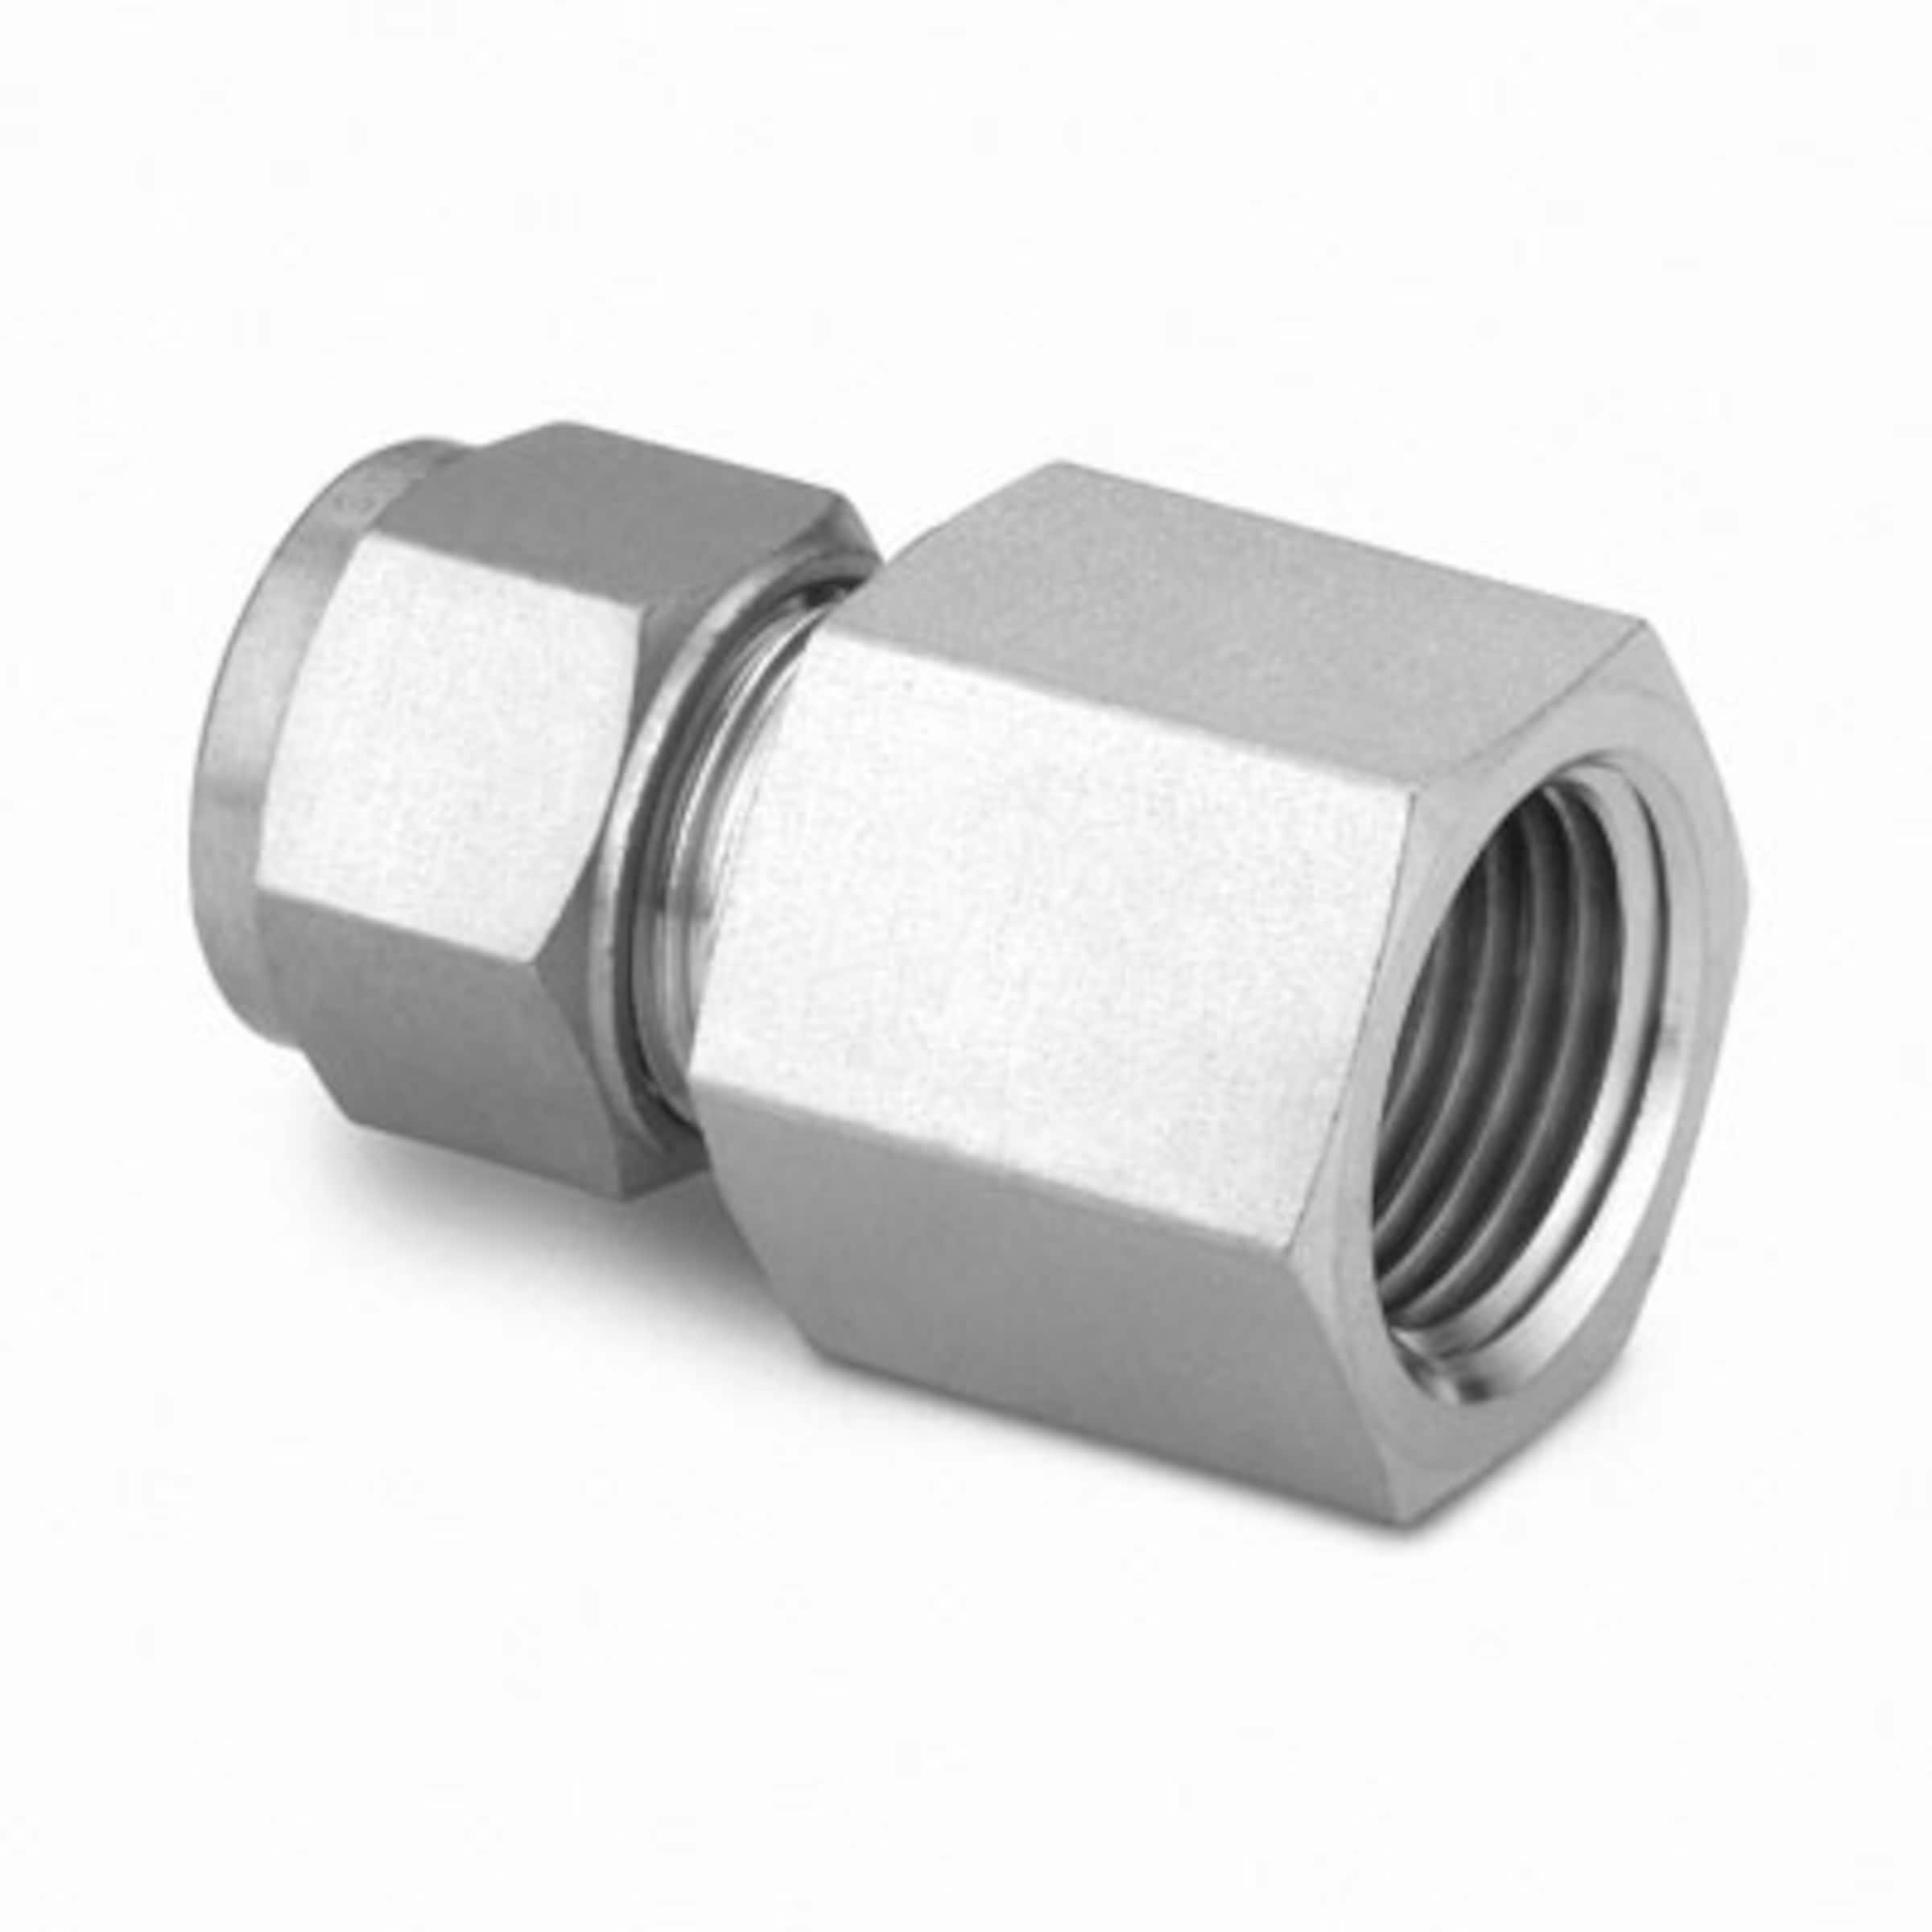 SS Swagelok Male Connector 1 4 in Tube OD x 2 NPT SS-400-1-8 for sale online